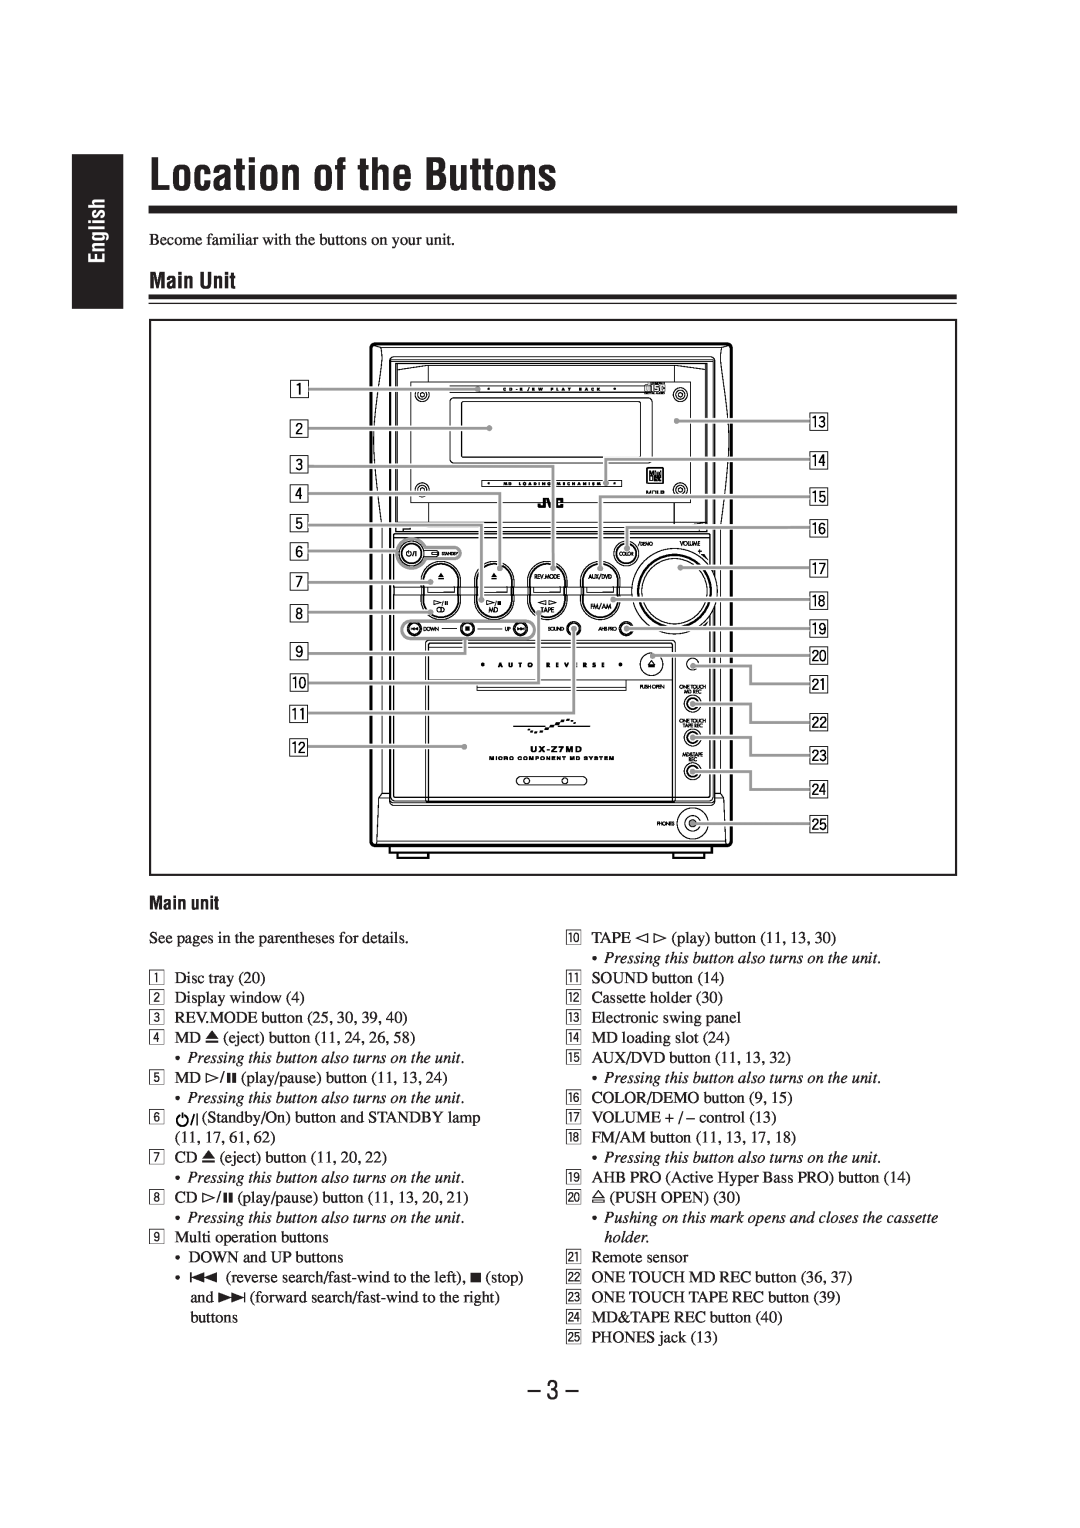 JVC LVT0900-004A, CA-UXZ7MD manual Location of the Buttons, Main Unit, English 